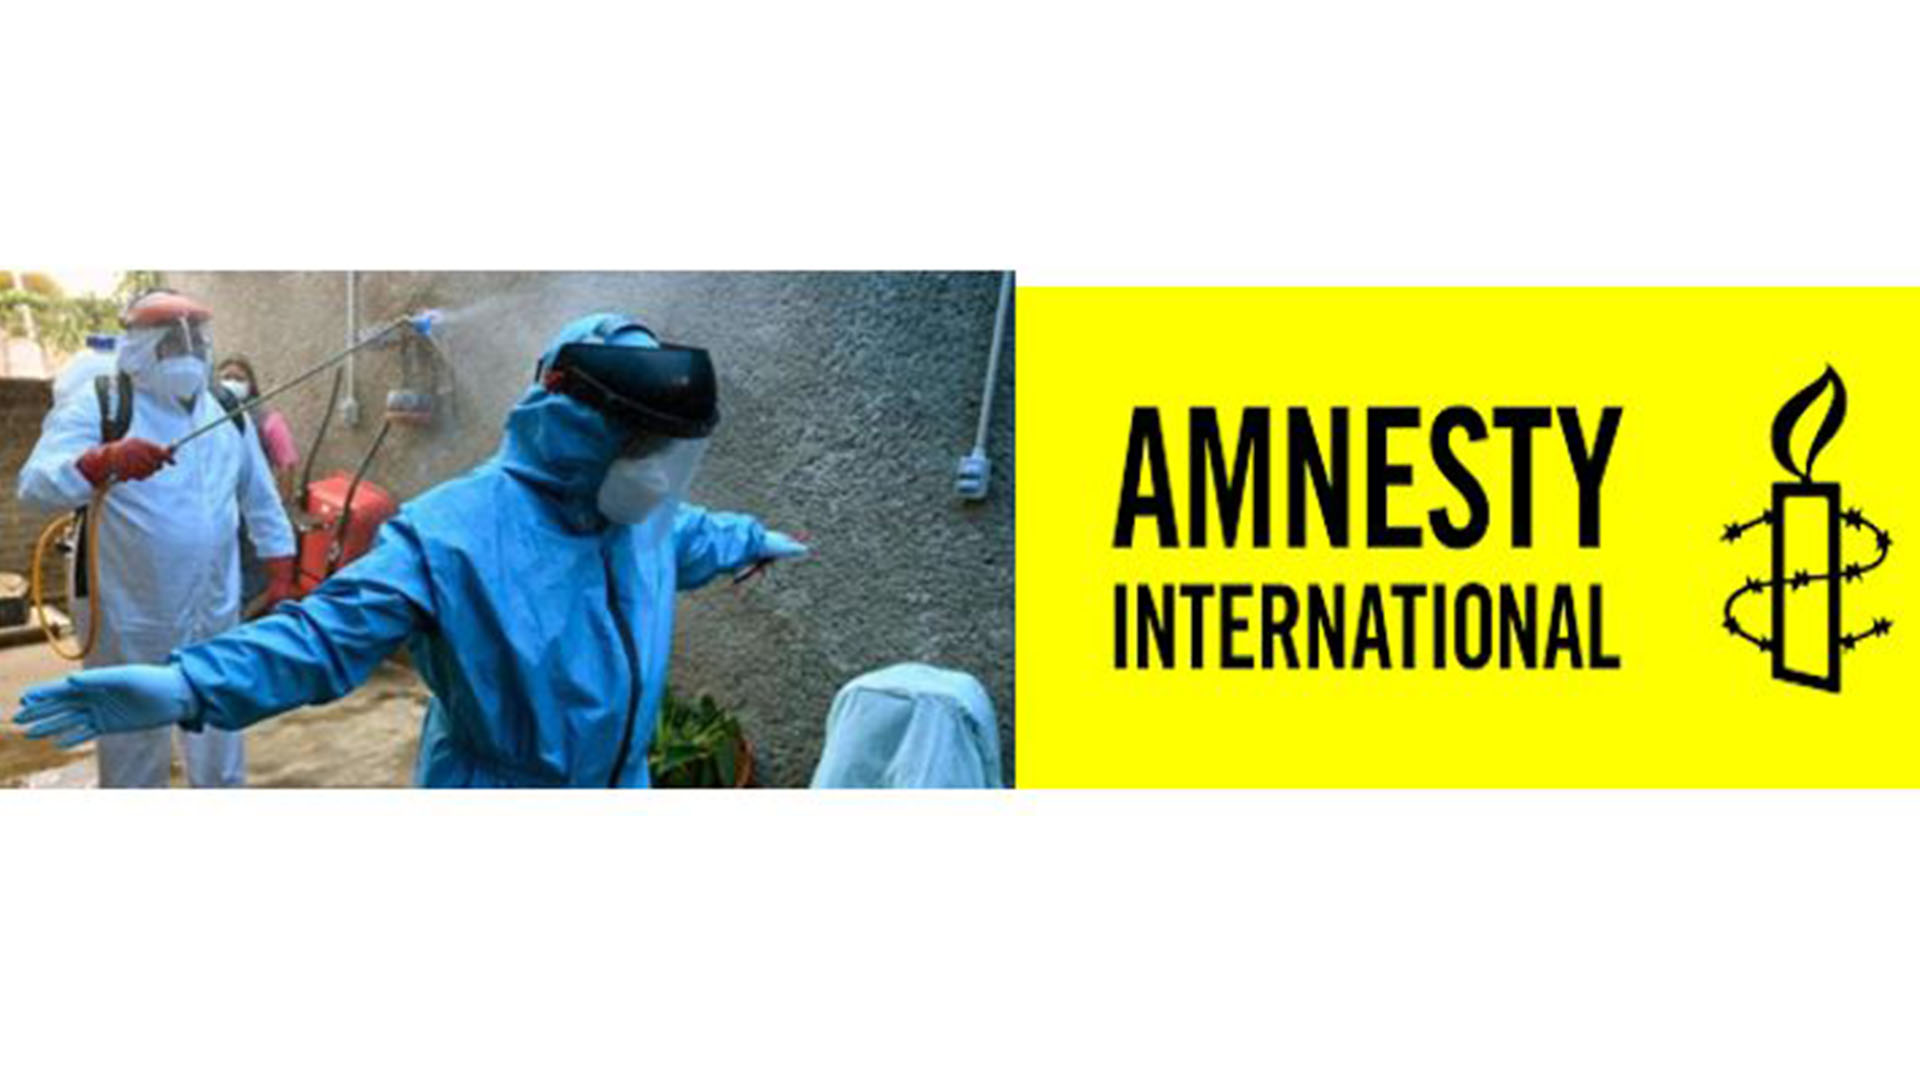 Over 7,000 health workers died due to Covid-19 worldwide: Amnesty